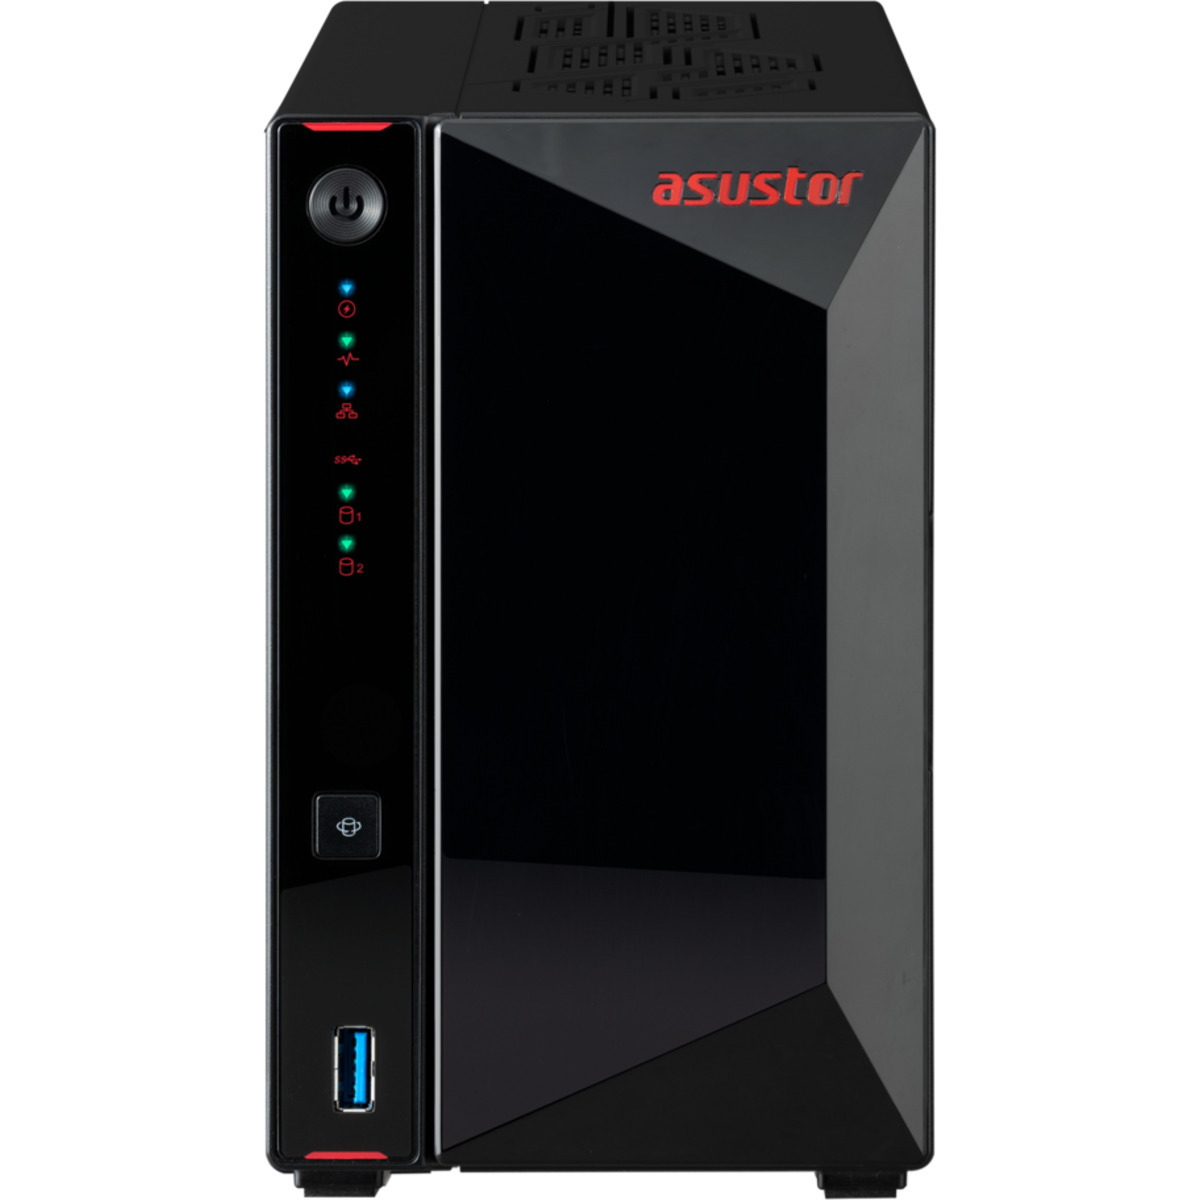 ASUSTOR Nimbustor 2 Gen2 AS5402T 16tb 2-Bay Desktop Multimedia / Power User / Business NAS - Network Attached Storage Device 2x8tb Western Digital Red Pro WD8005FFBX 3.5 7200rpm SATA 6Gb/s HDD NAS Class Drives Installed - Burn-In Tested - FREE RAM UPGRADE Nimbustor 2 Gen2 AS5402T